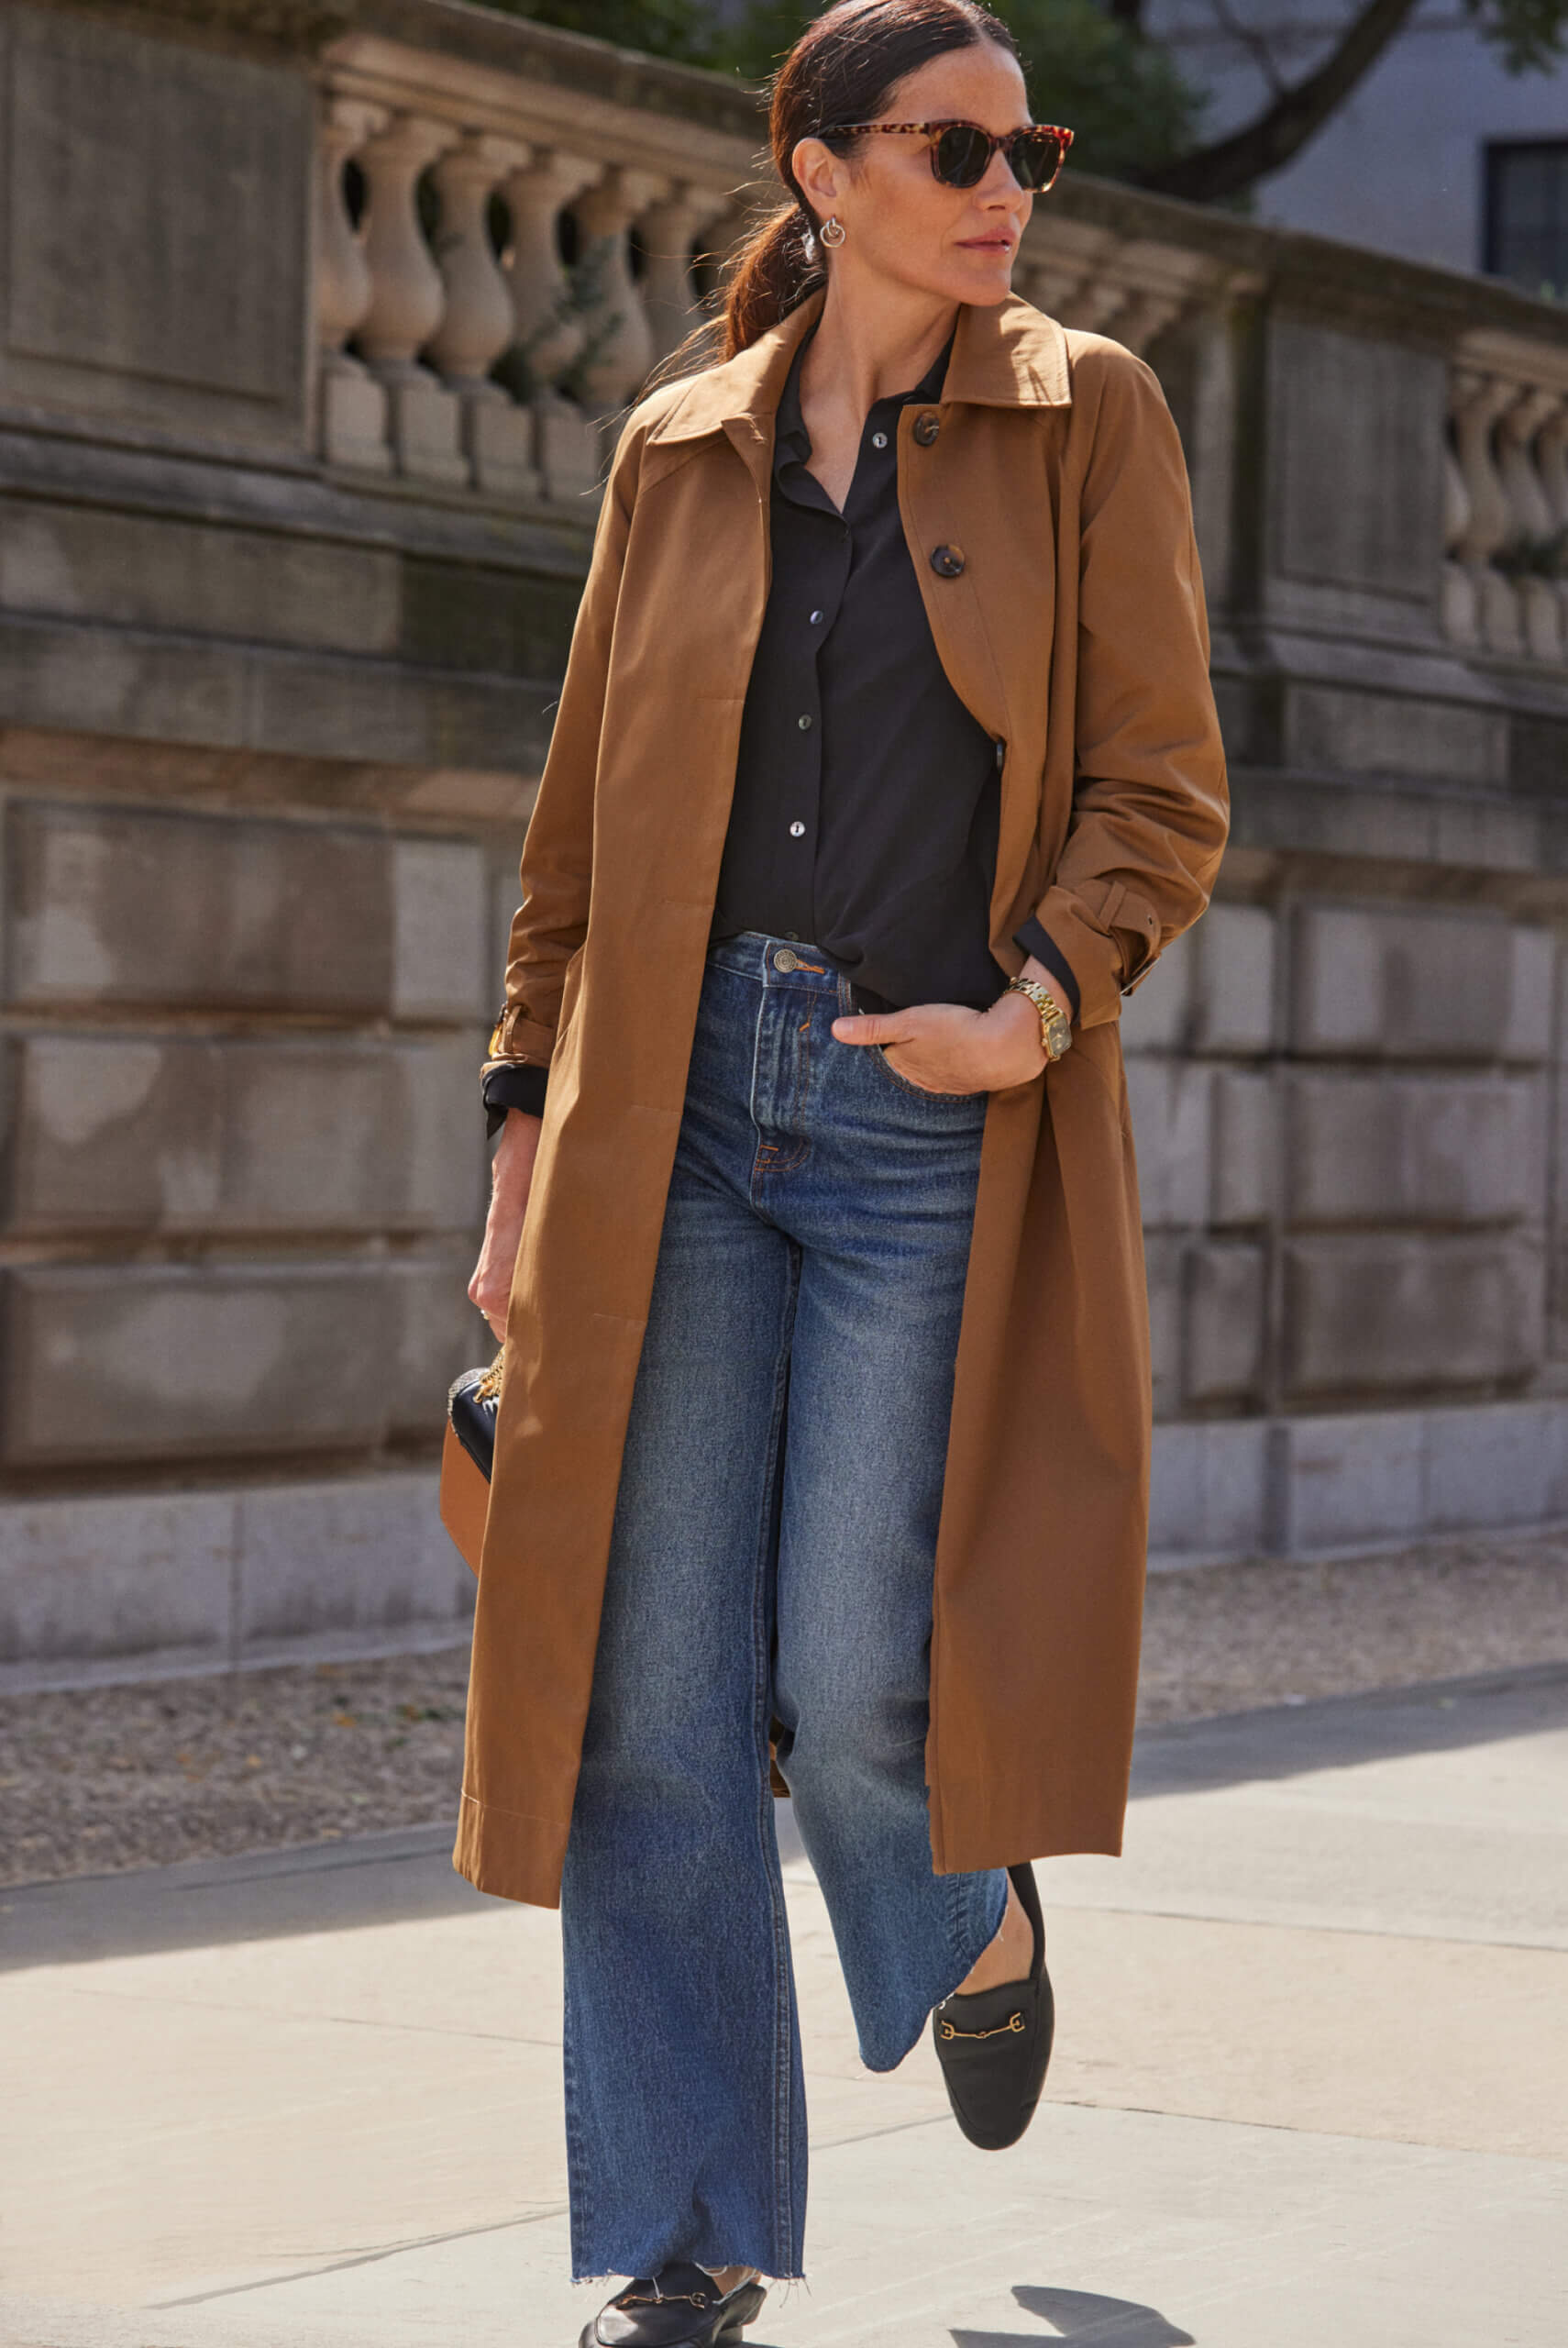 Alt text: A woman walks wearing sunglasses, a black button-down shirt and blue flare jeans underneath a long brown coat. 